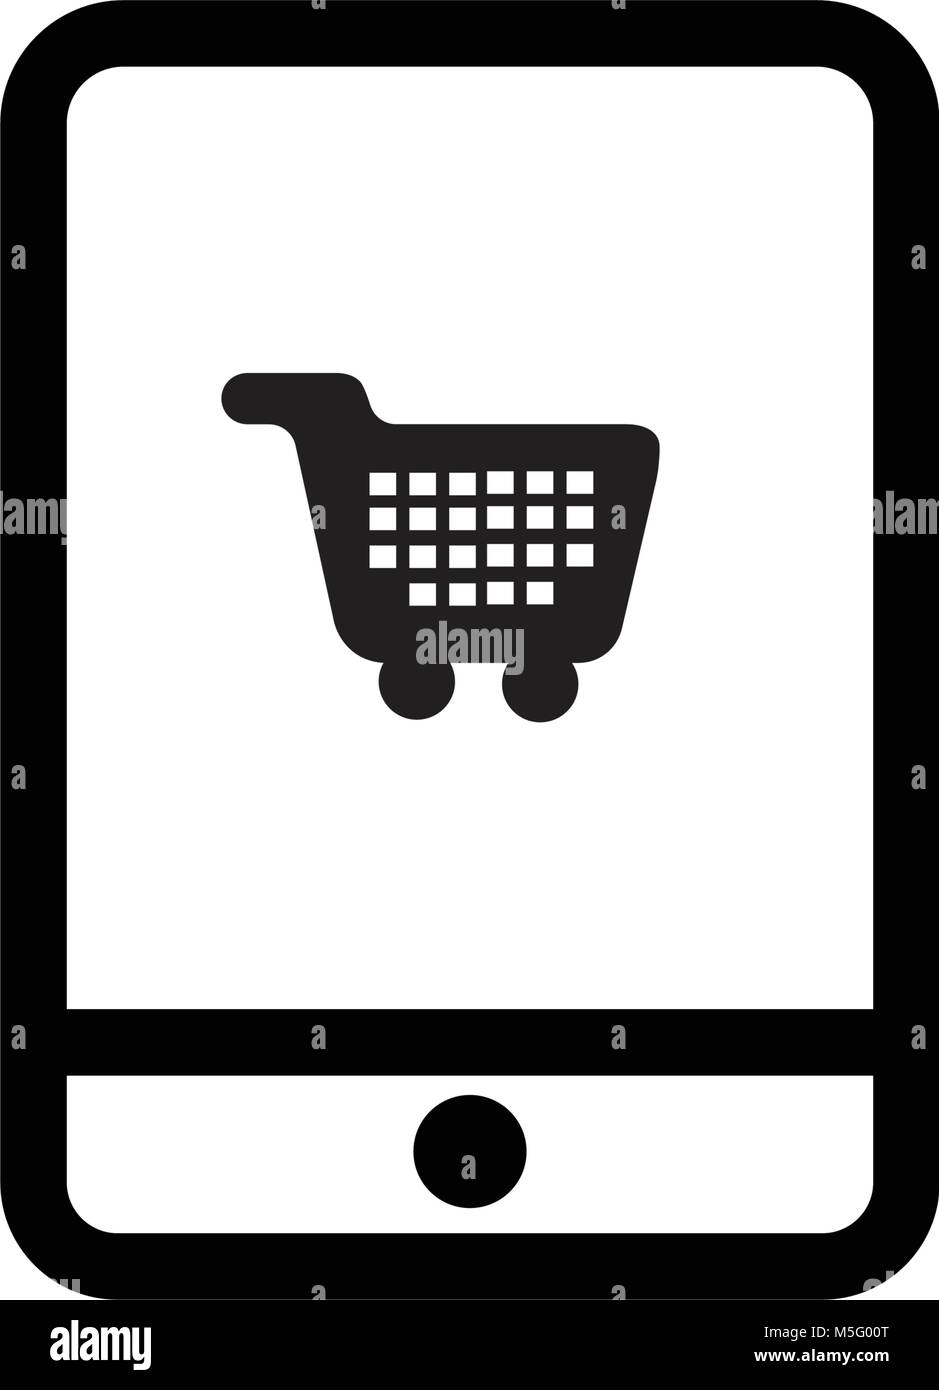 Online Shopping icon line outline style isolated on white background for your web and mobile app design, vector illustration Stock Vector